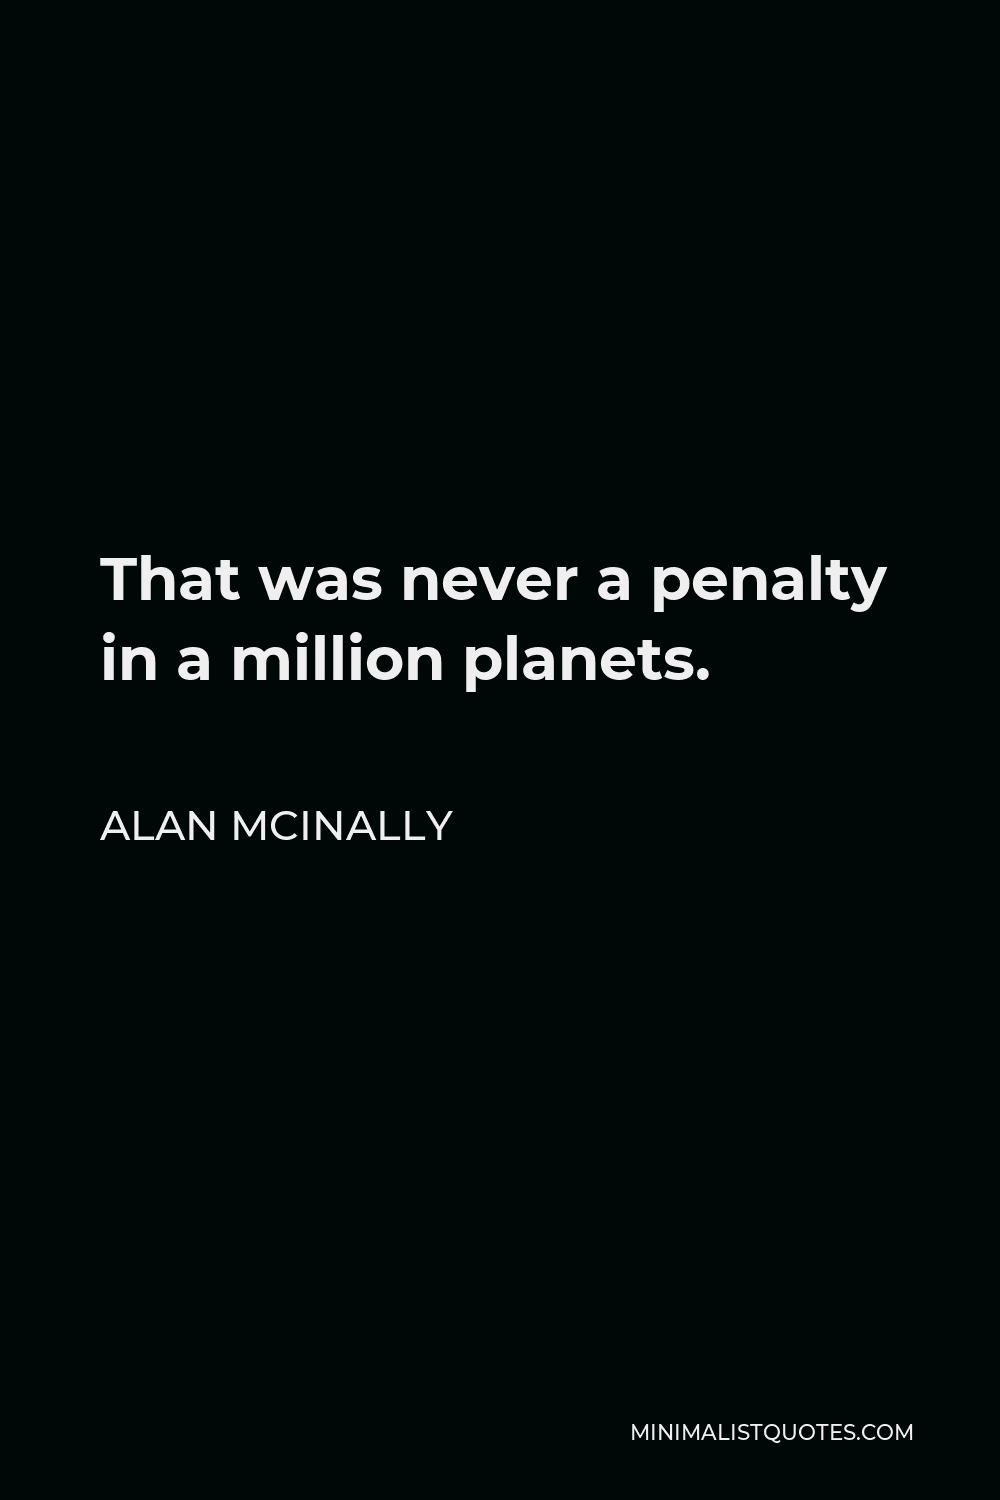 Alan McInally Quote - That was never a penalty in a million planets.